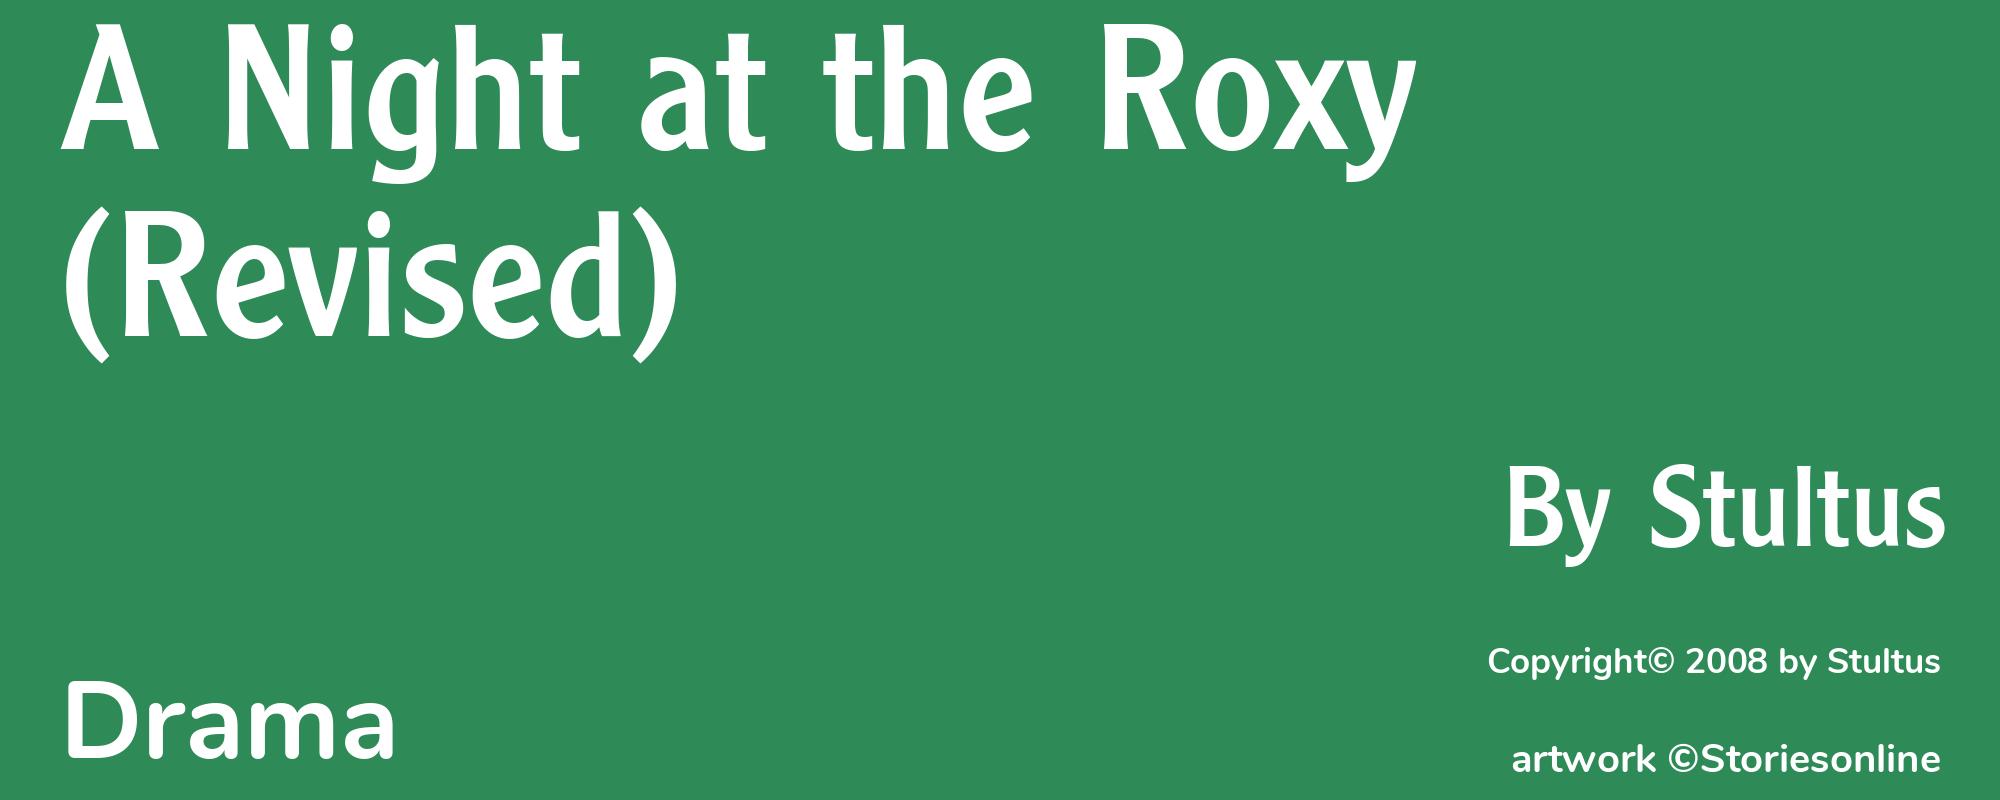 A Night at the Roxy (Revised) - Cover